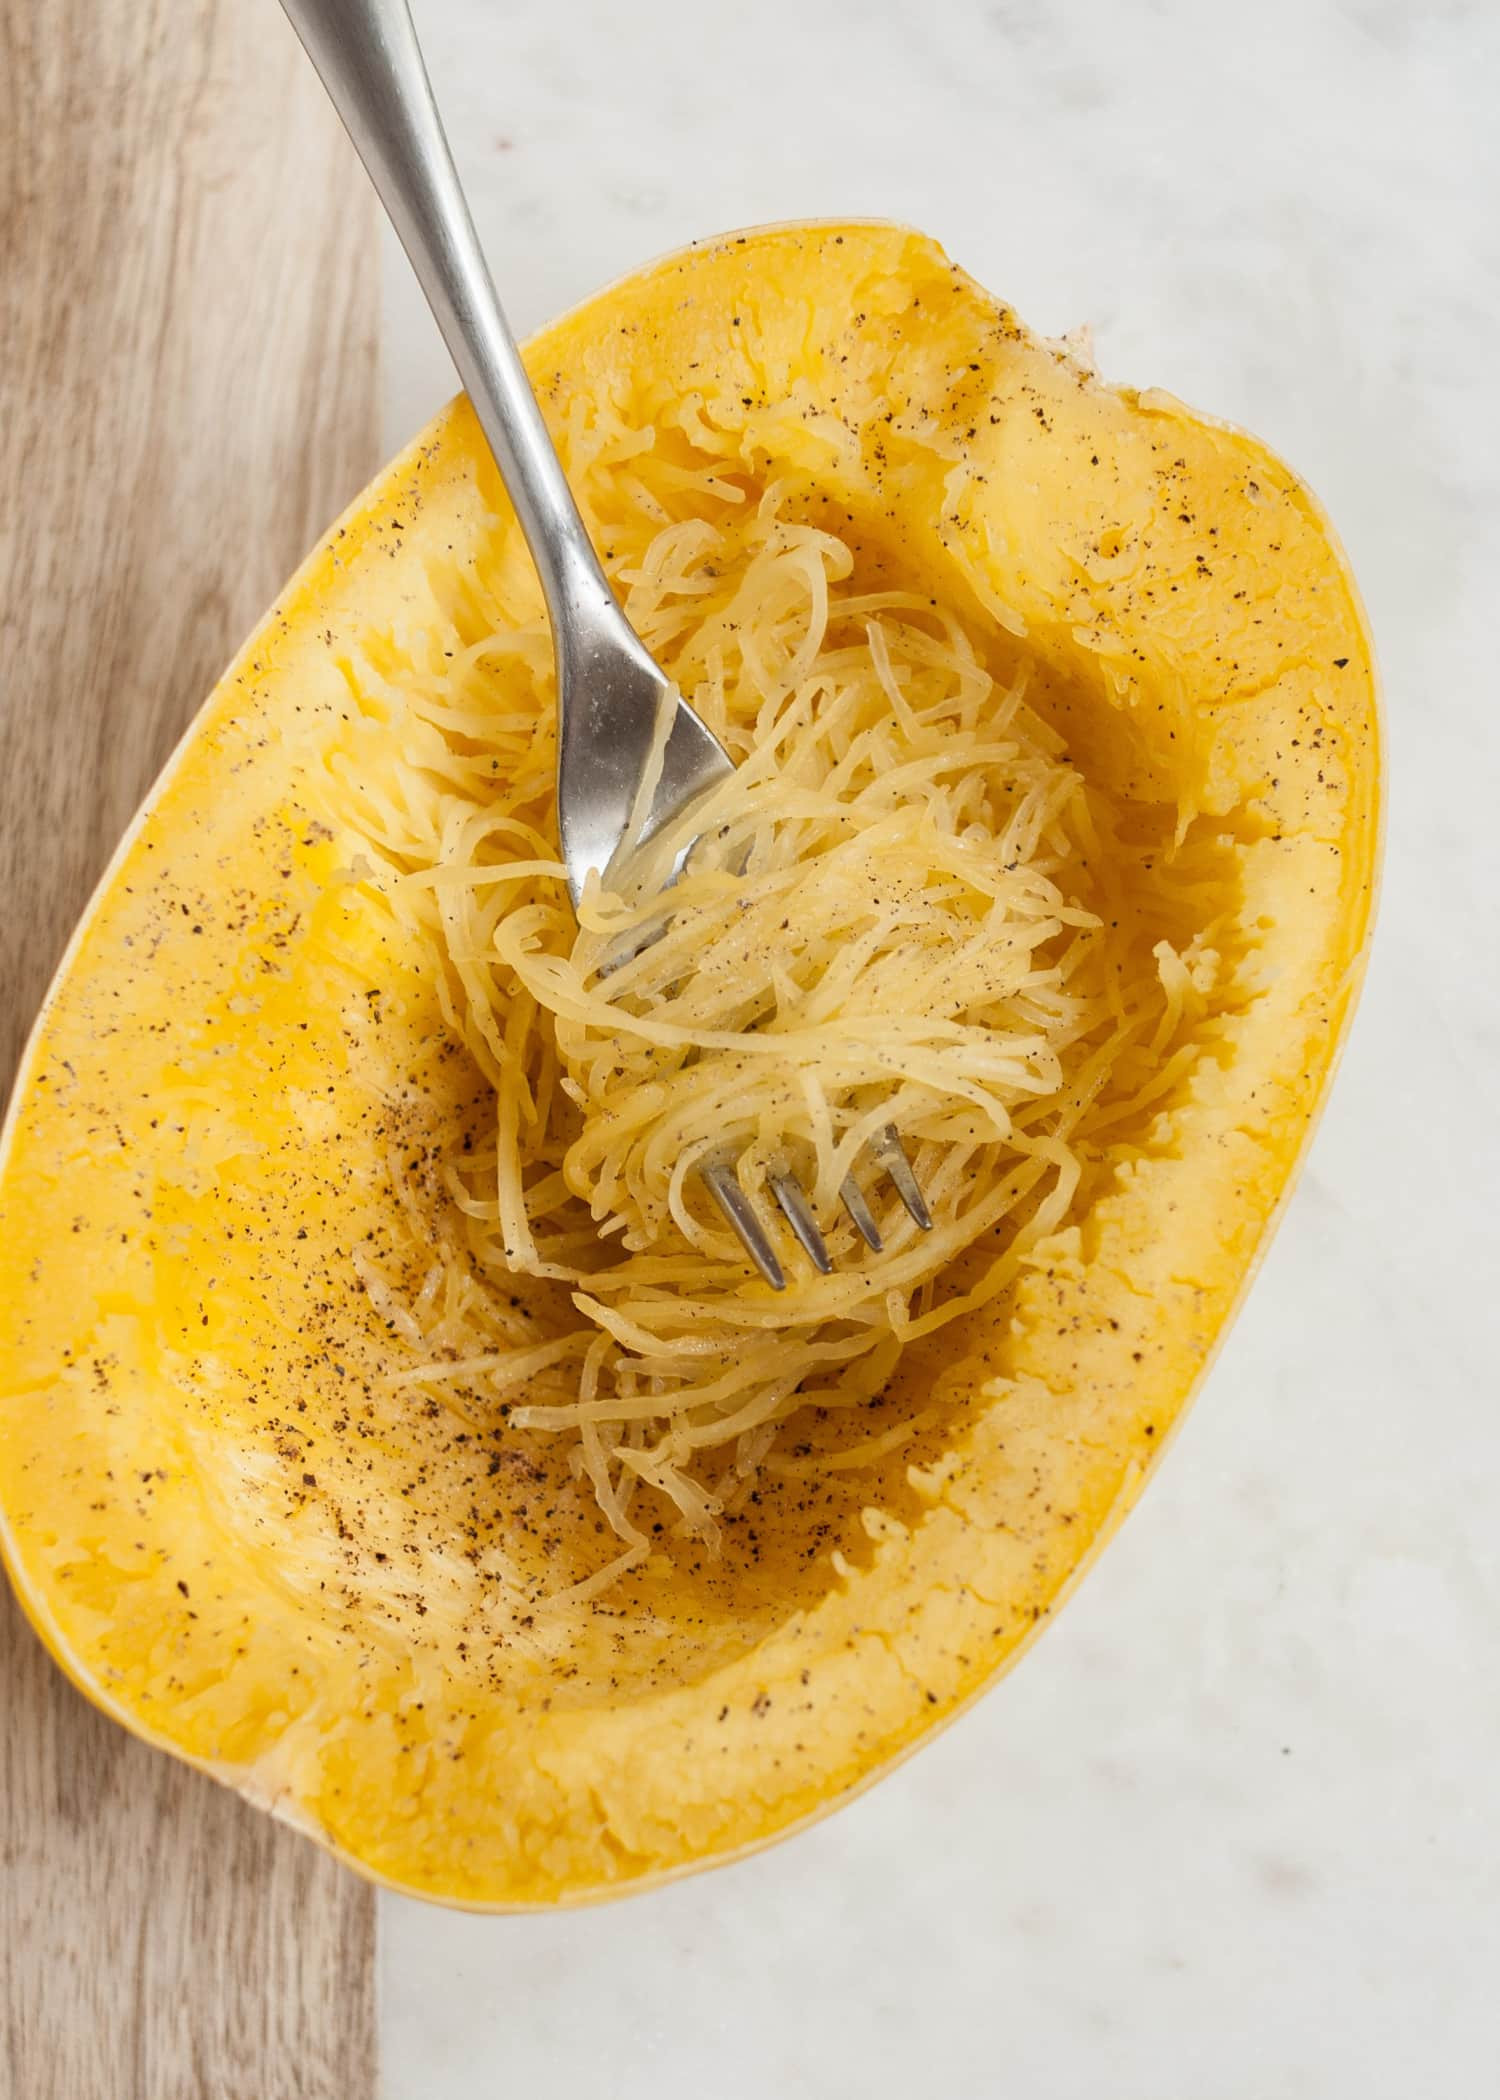 Cooking Spaghetti In Microwave
 How To Cook Spaghetti Squash in the Microwave